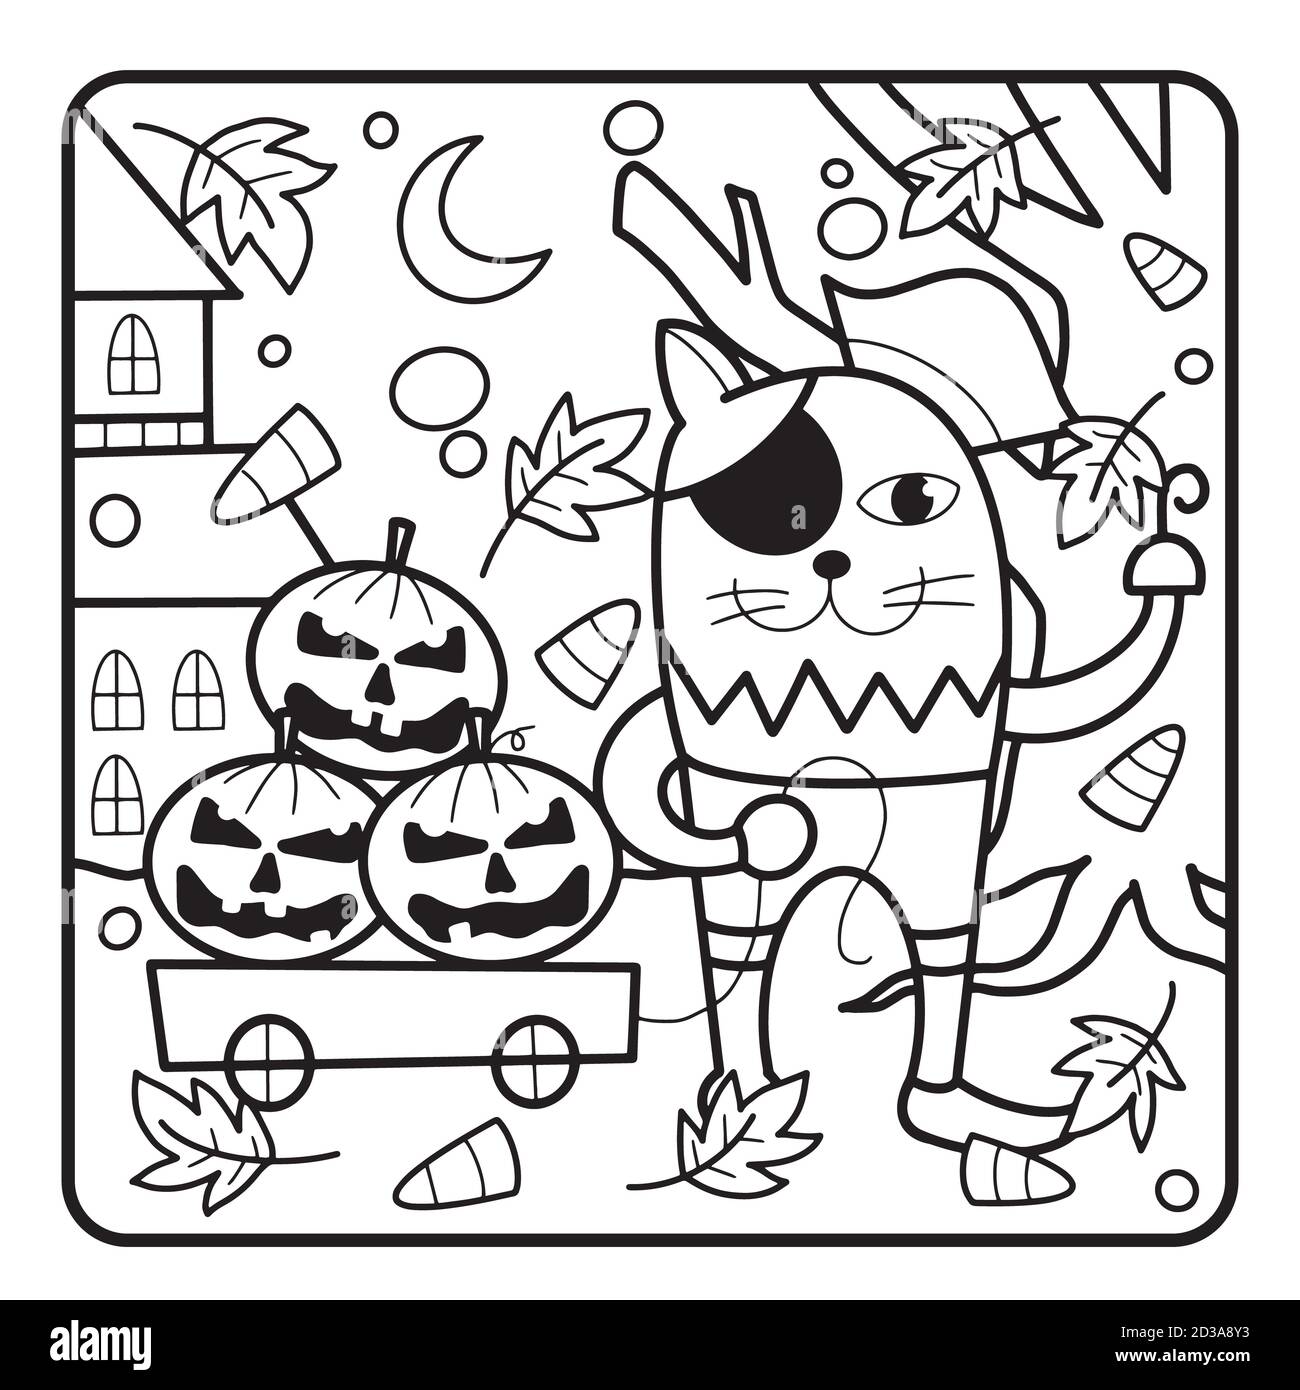 Christmas coloring page for kids Stock Photo - Alamy